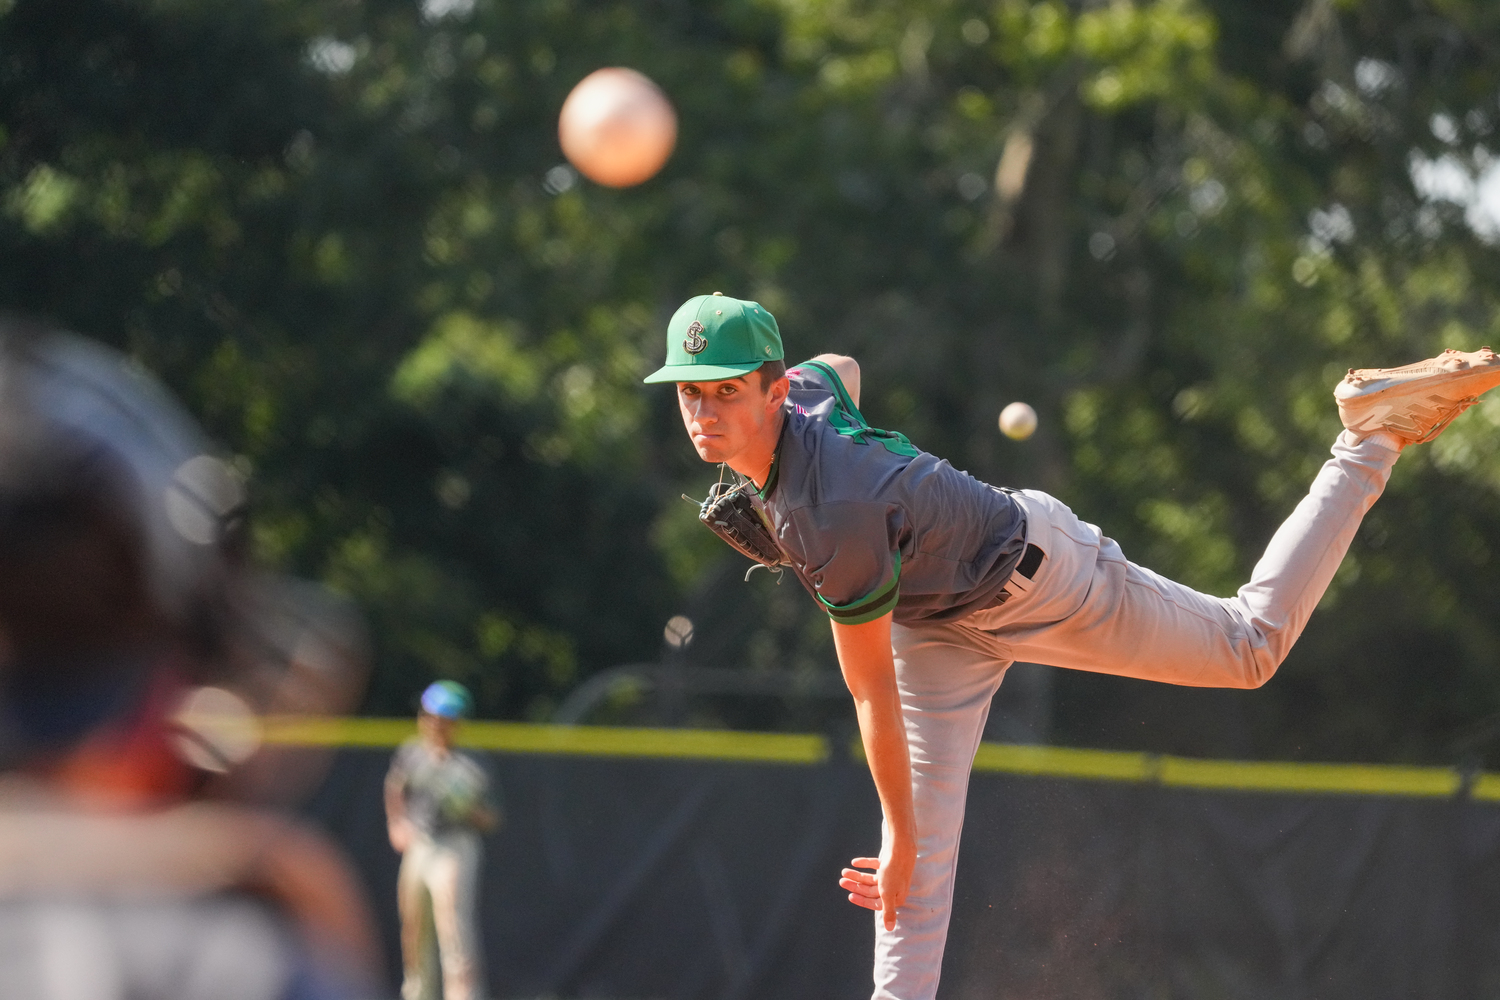 South Shore starting pitcher Bobby Finn was strong in Monday's game three, allowing just three runs in six innings.   RON ESPOSITO